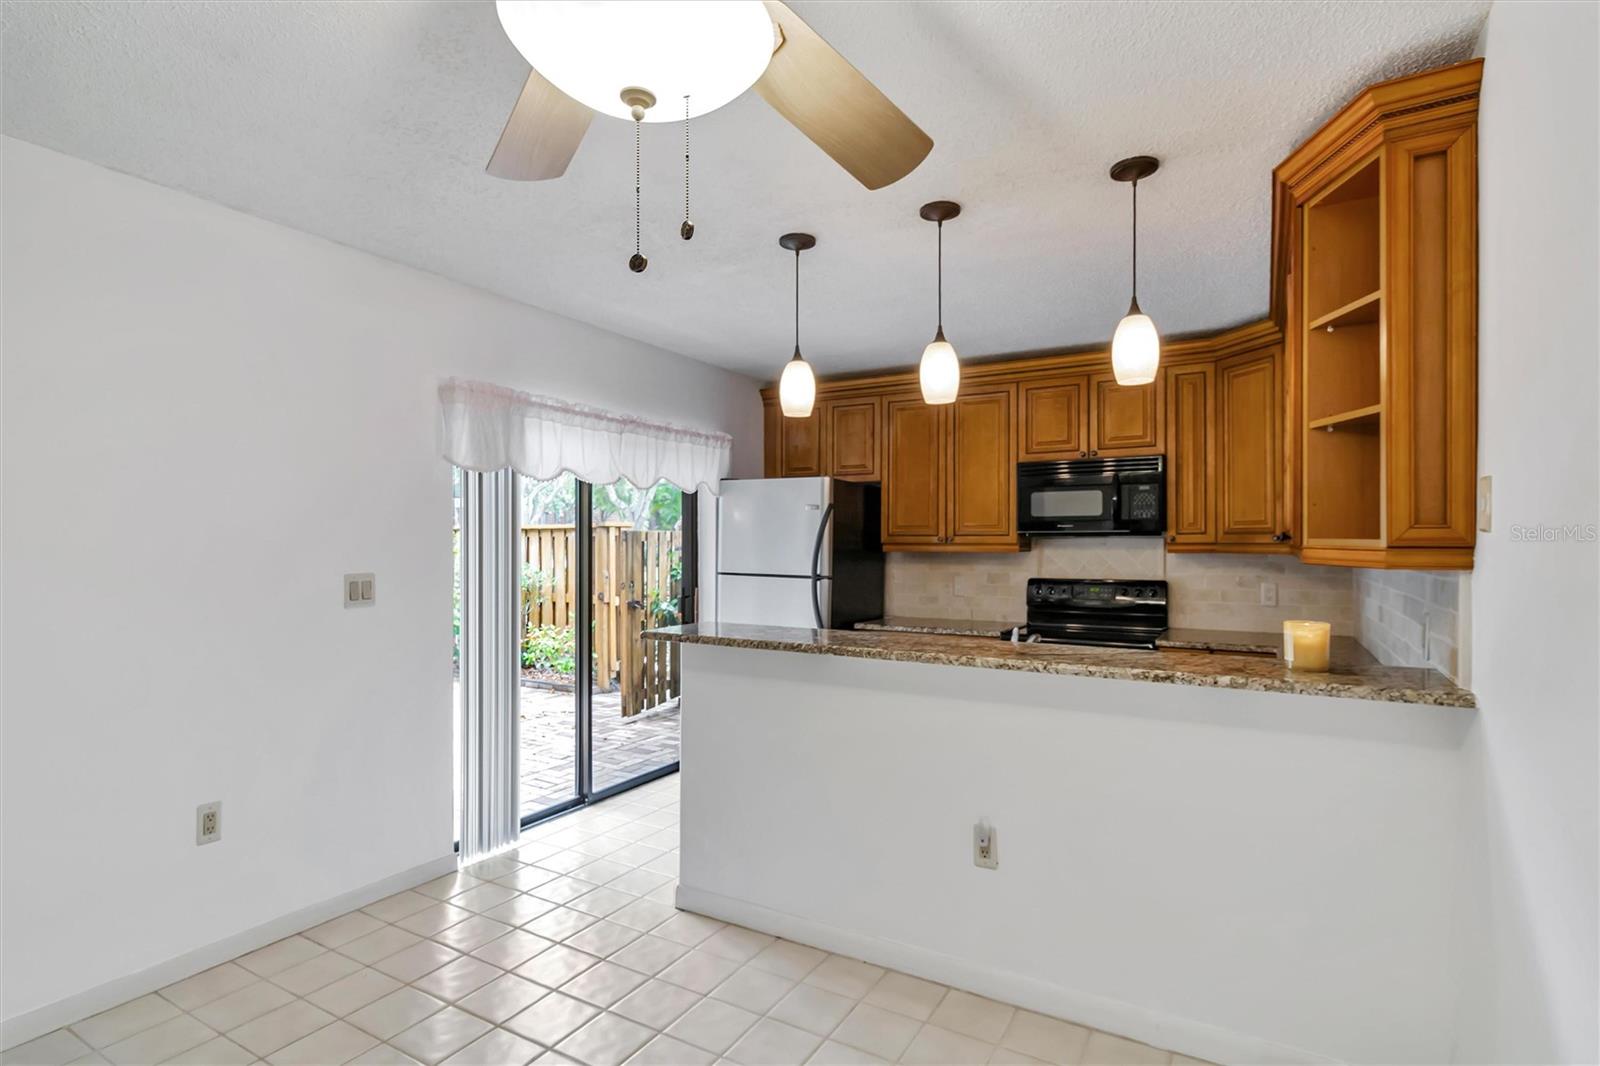 Updated kitchen with sliding glass doors to lead to patio. Perfect for BBQing and easy access to patio from kitchen